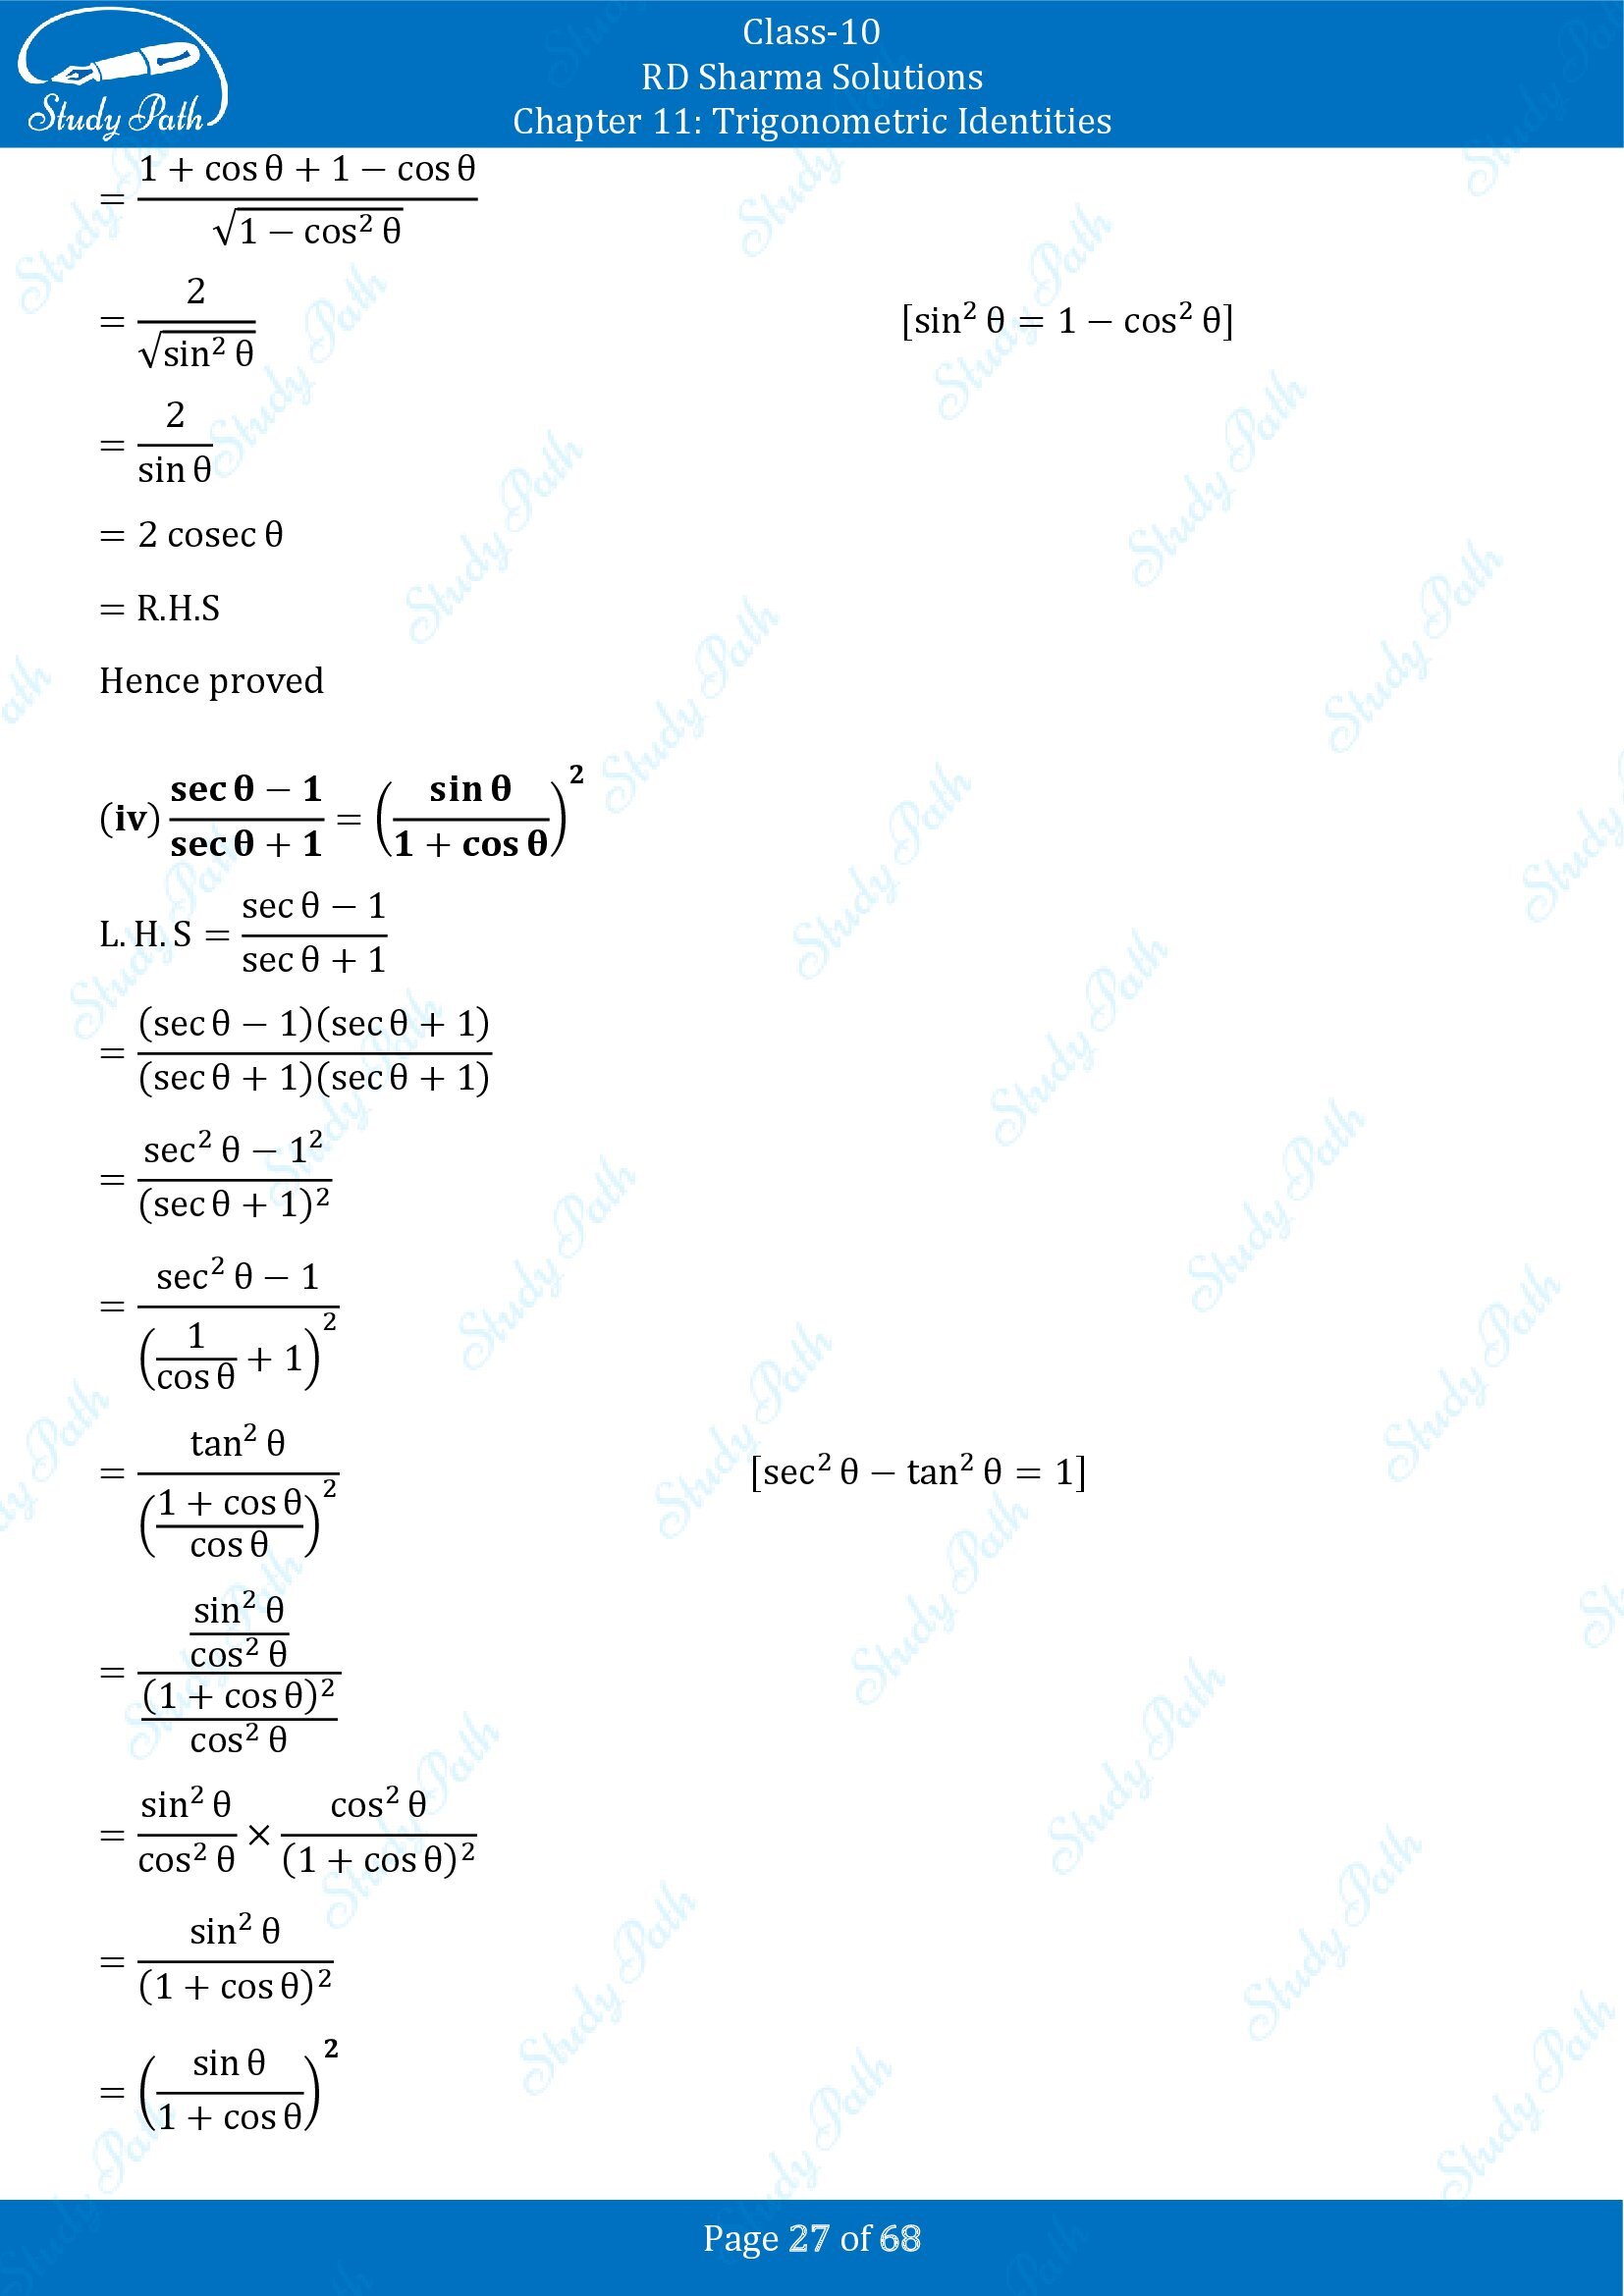 RD Sharma Solutions Class 10 Chapter 11 Trigonometric Identities Exercise 11.1 00027